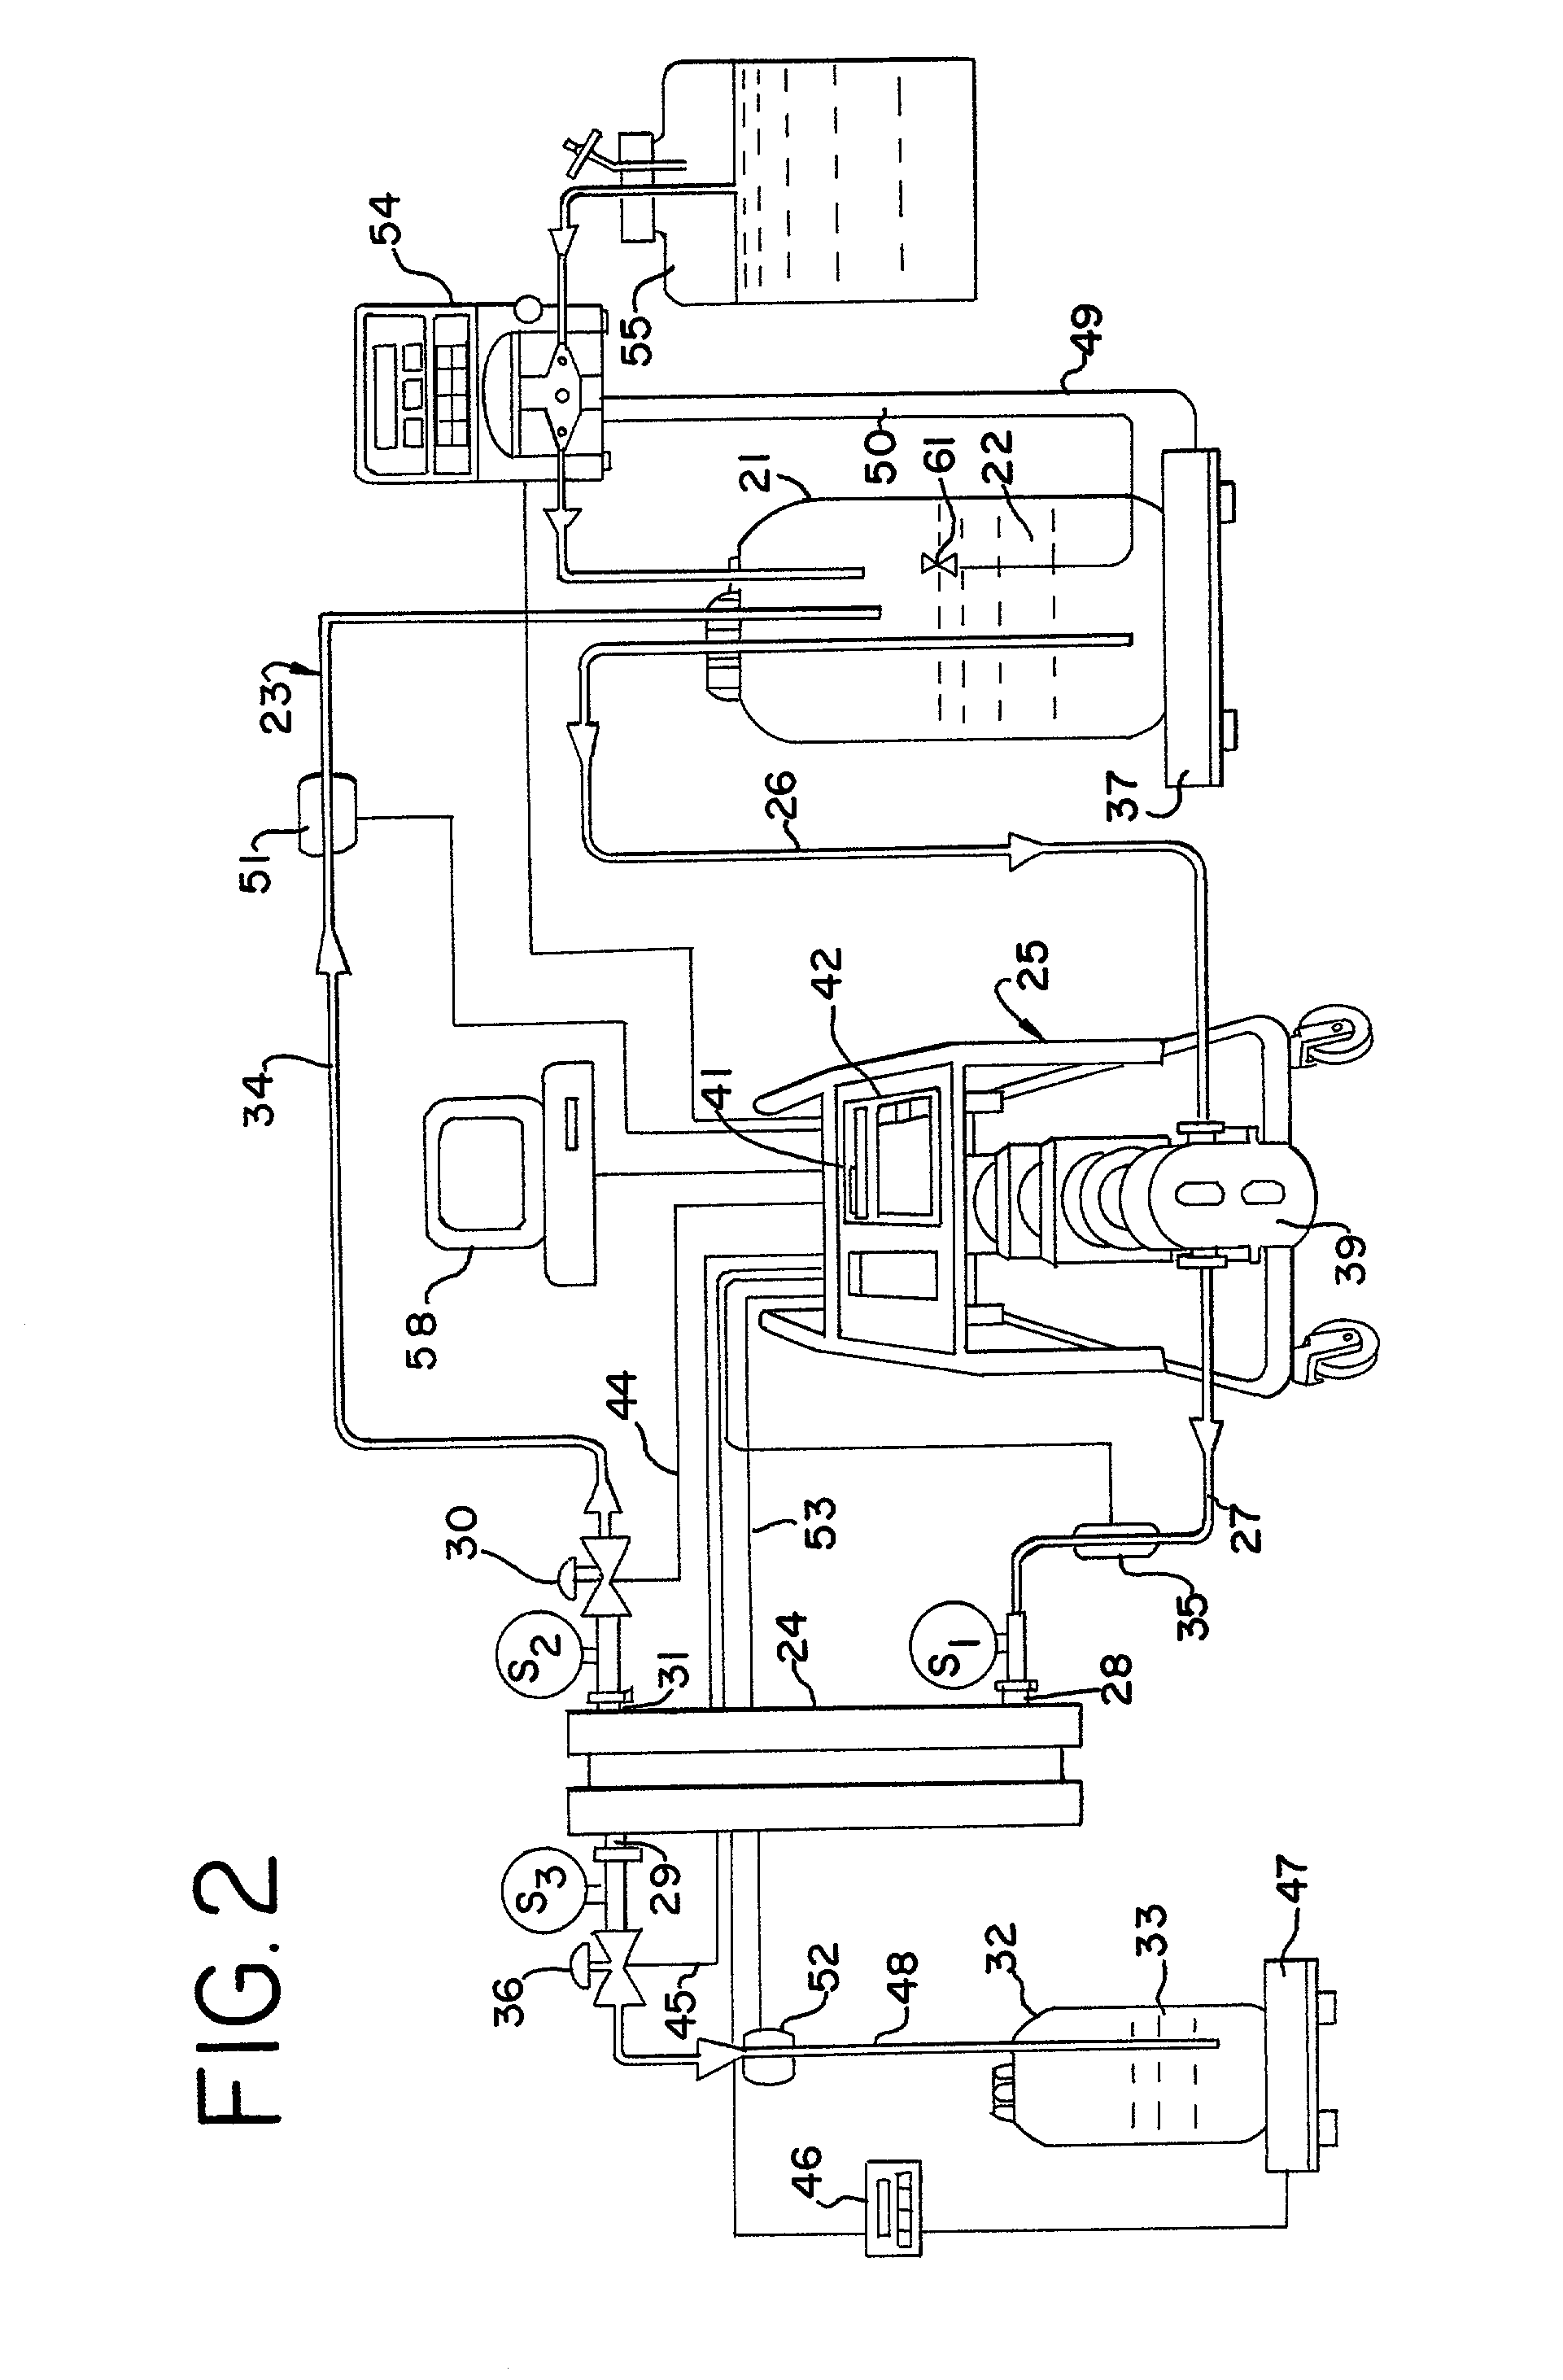 Method and apparatus for enhancing filtration yields in tangential flow filtration